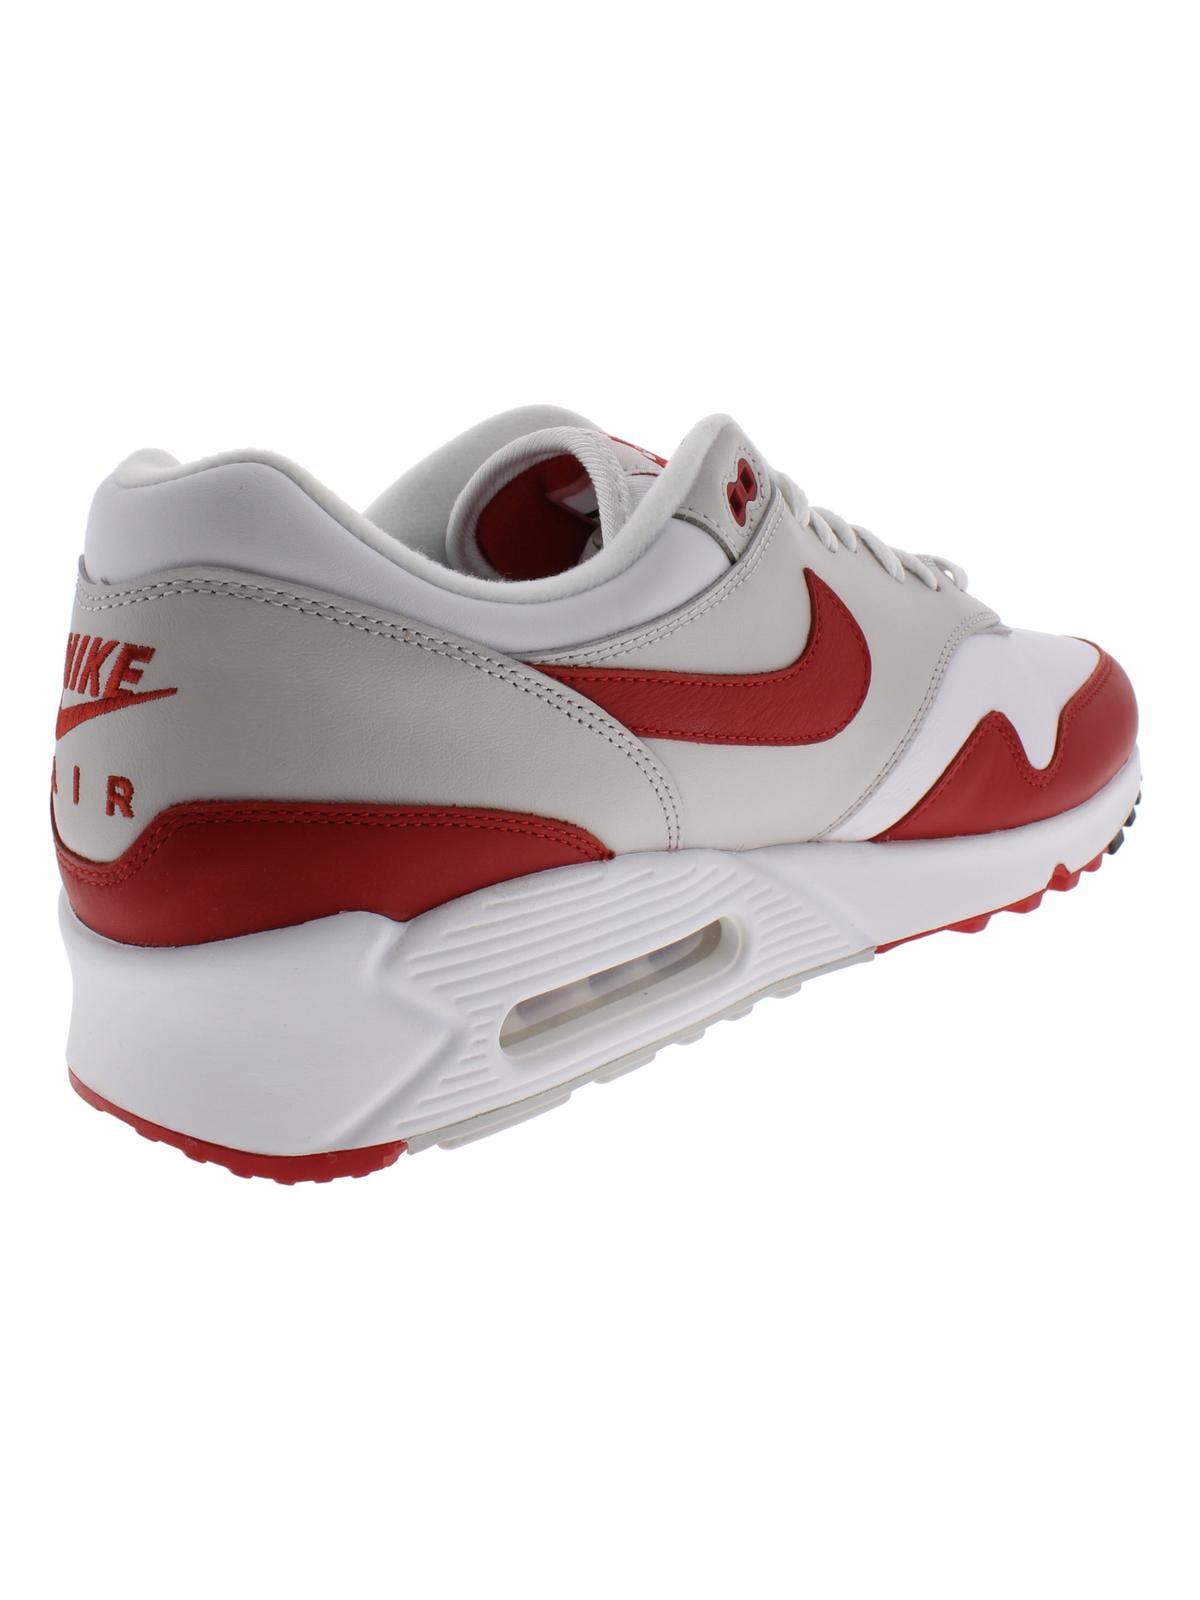 red and white air max 90 mens